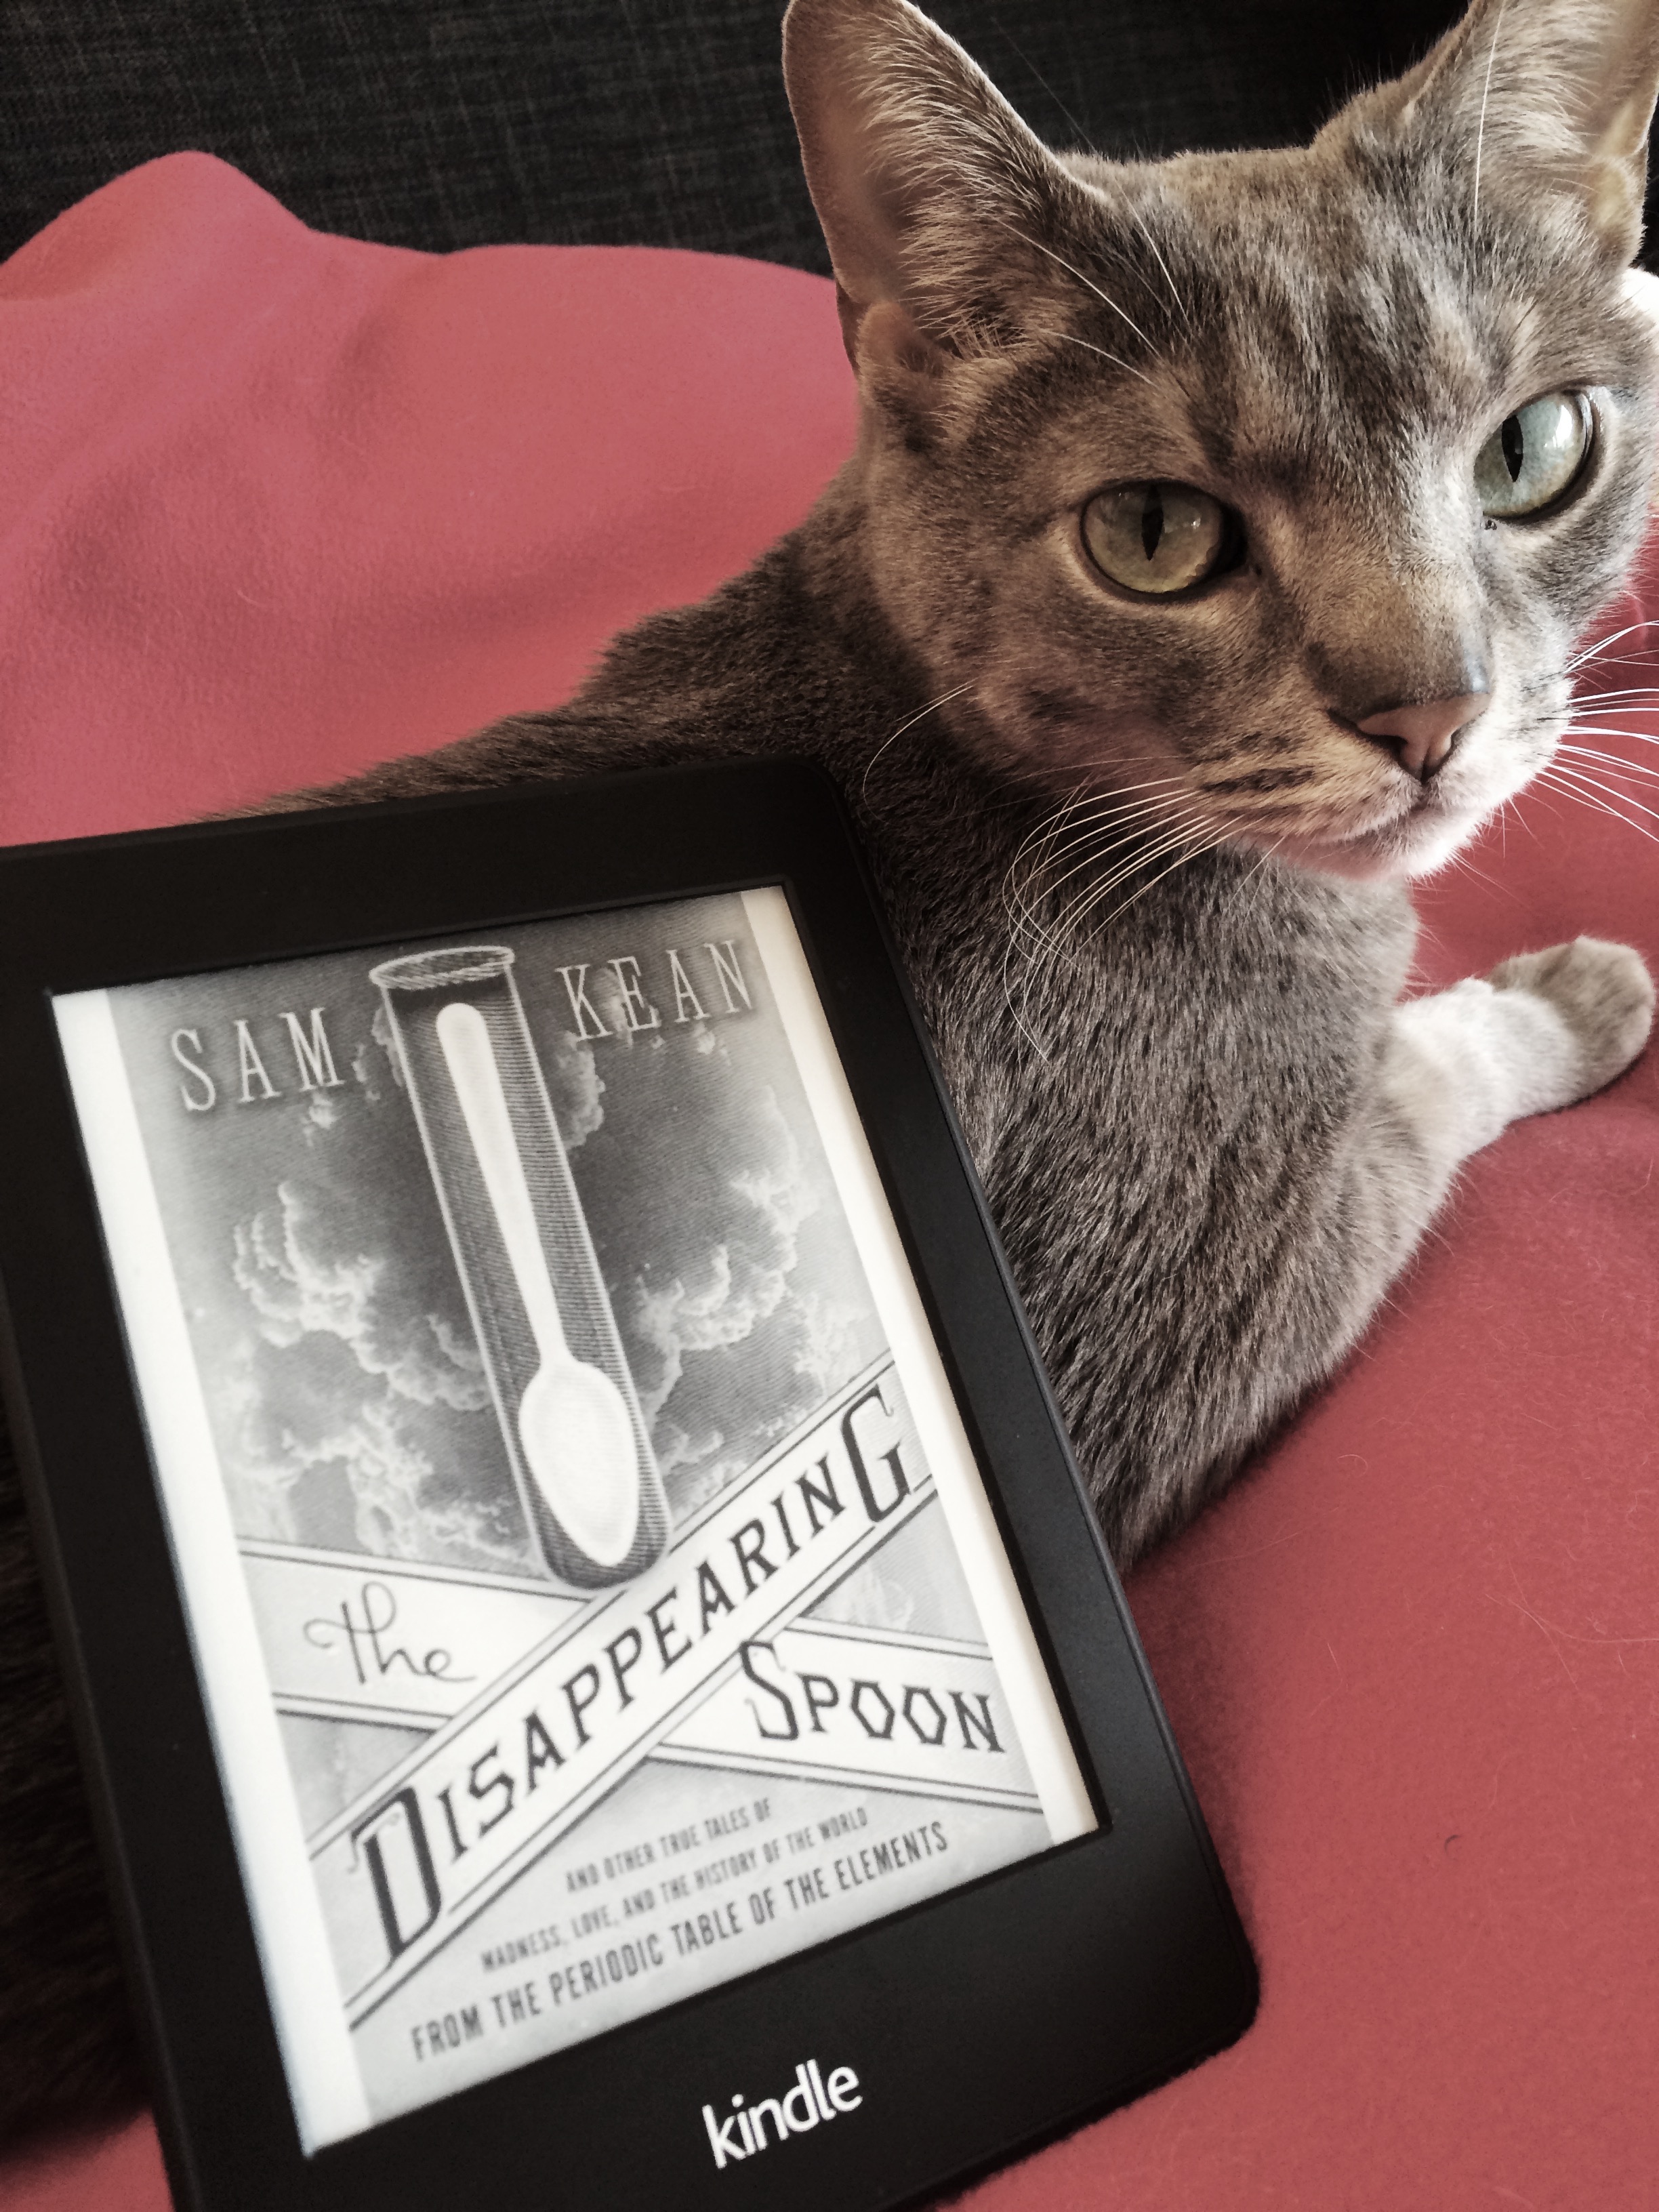 Ollie the cat makes a nice book rest for this Kindle version of Sam Kean's book The Disappearing Spoon